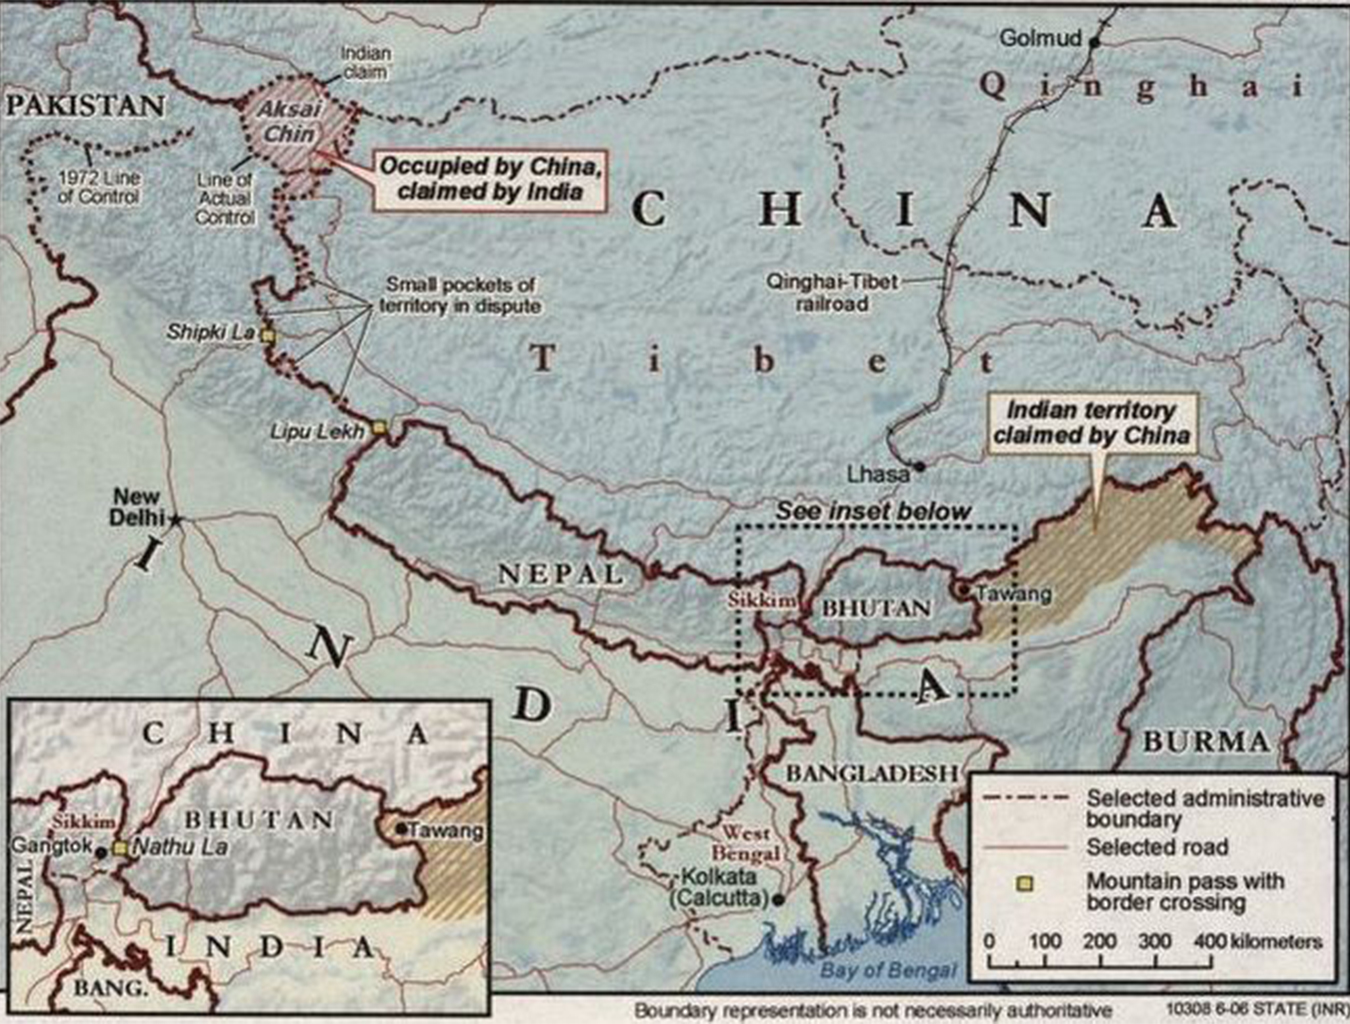 A CIA map showing vast contested Asian areas.